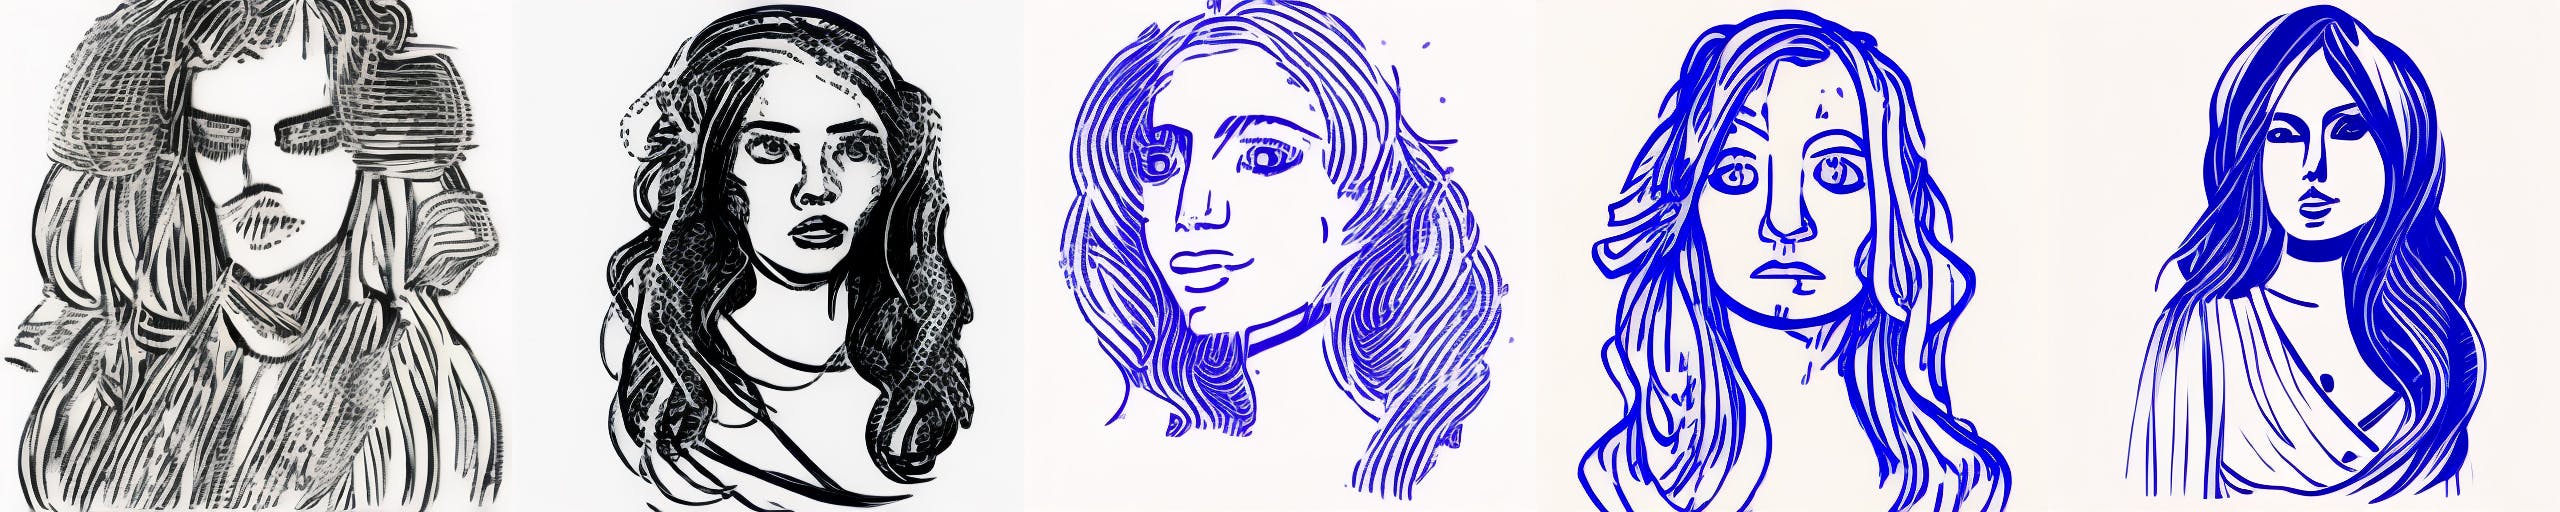 process of a blue lined illustration of a portrait of a woman